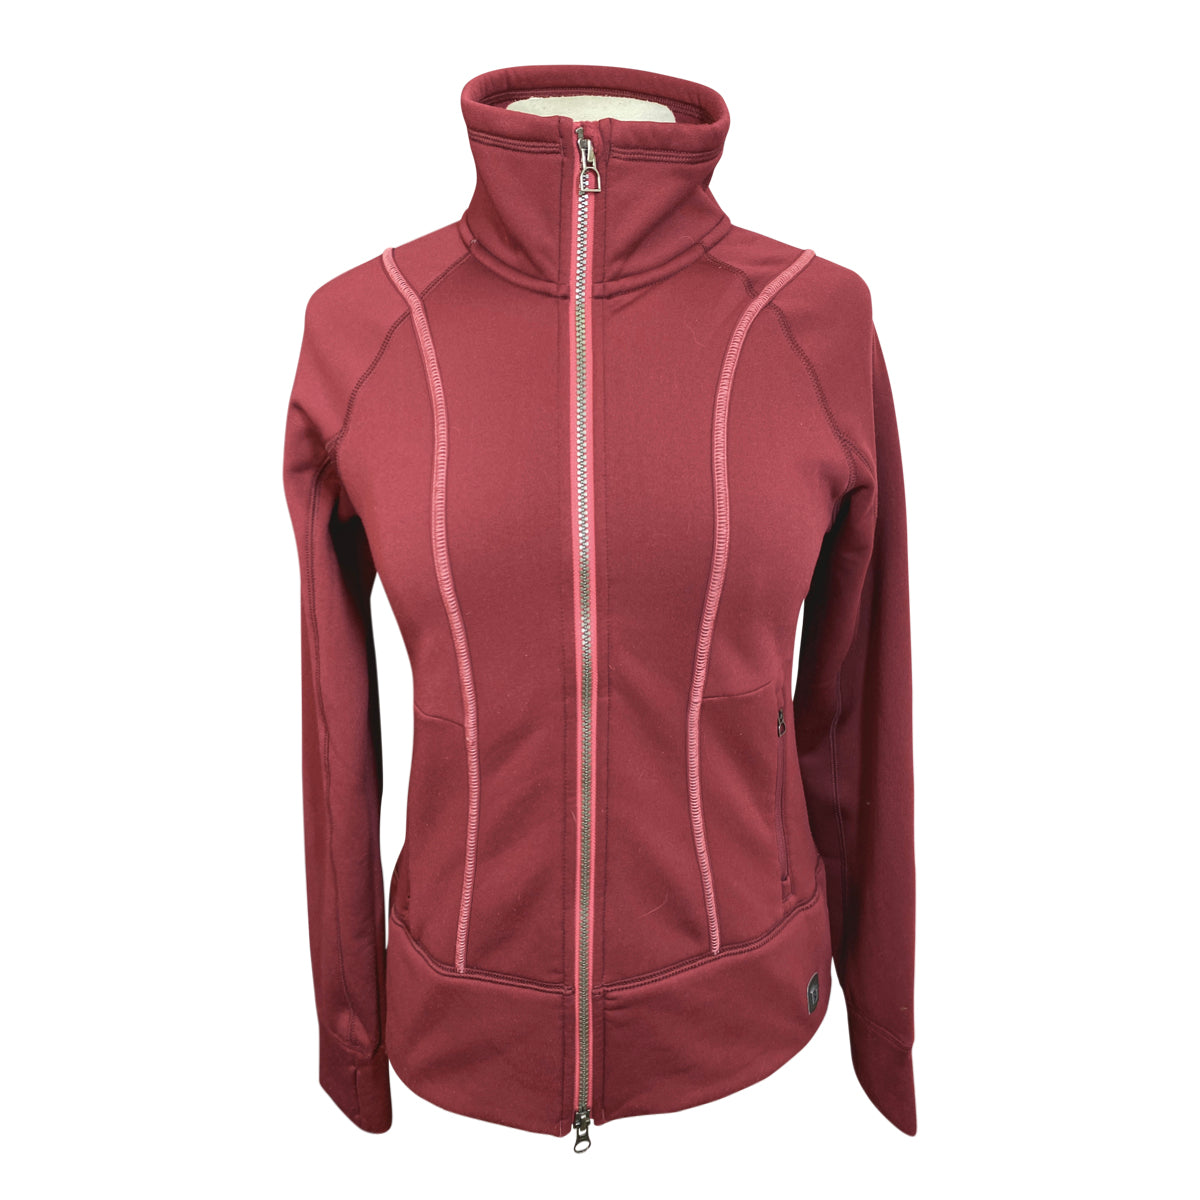 Noble Outfitters Softshell Jacket in Burgundy